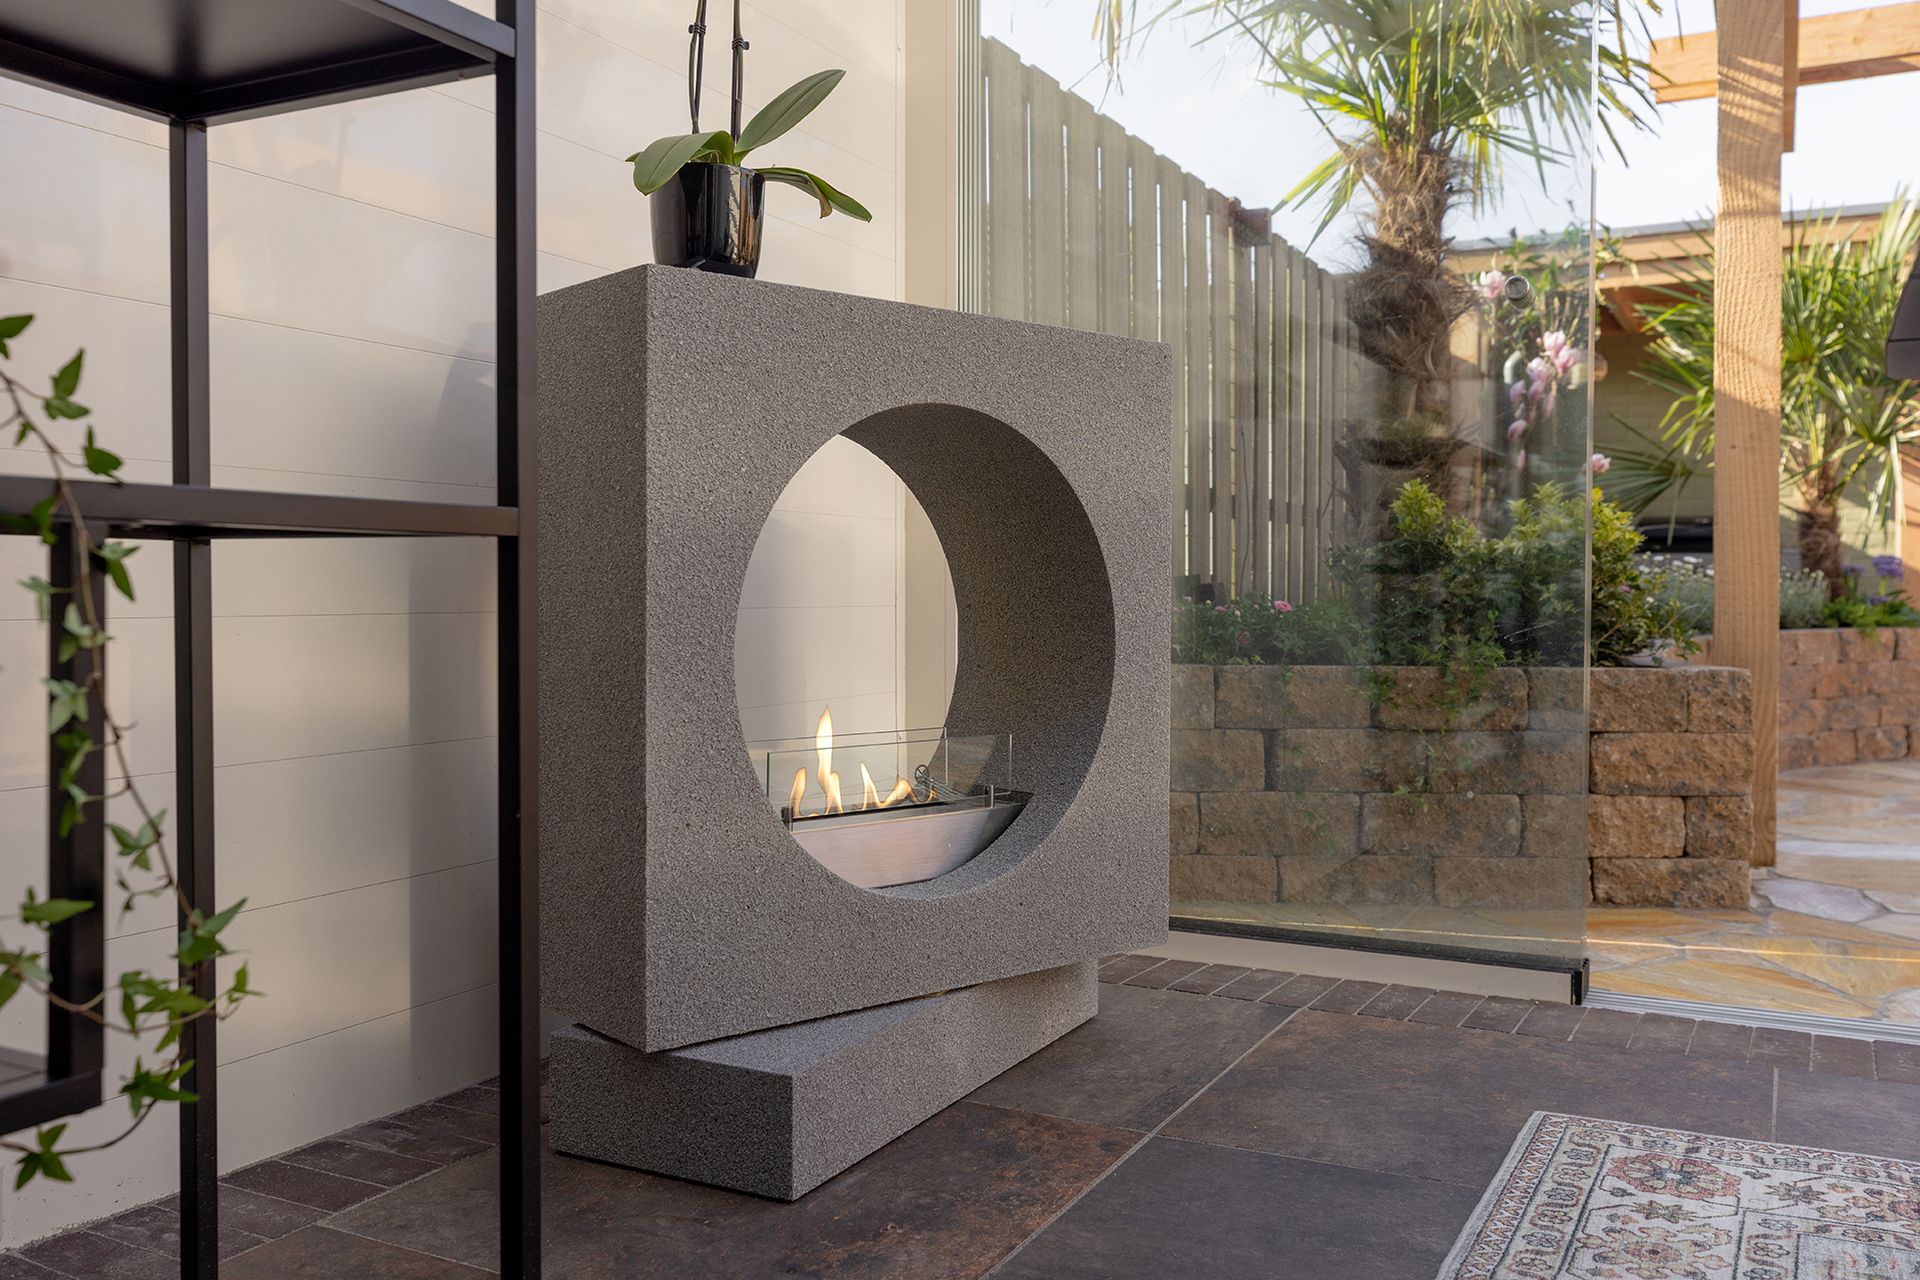 Bioethanol fireplace as roomdivider or outdoor fireplace